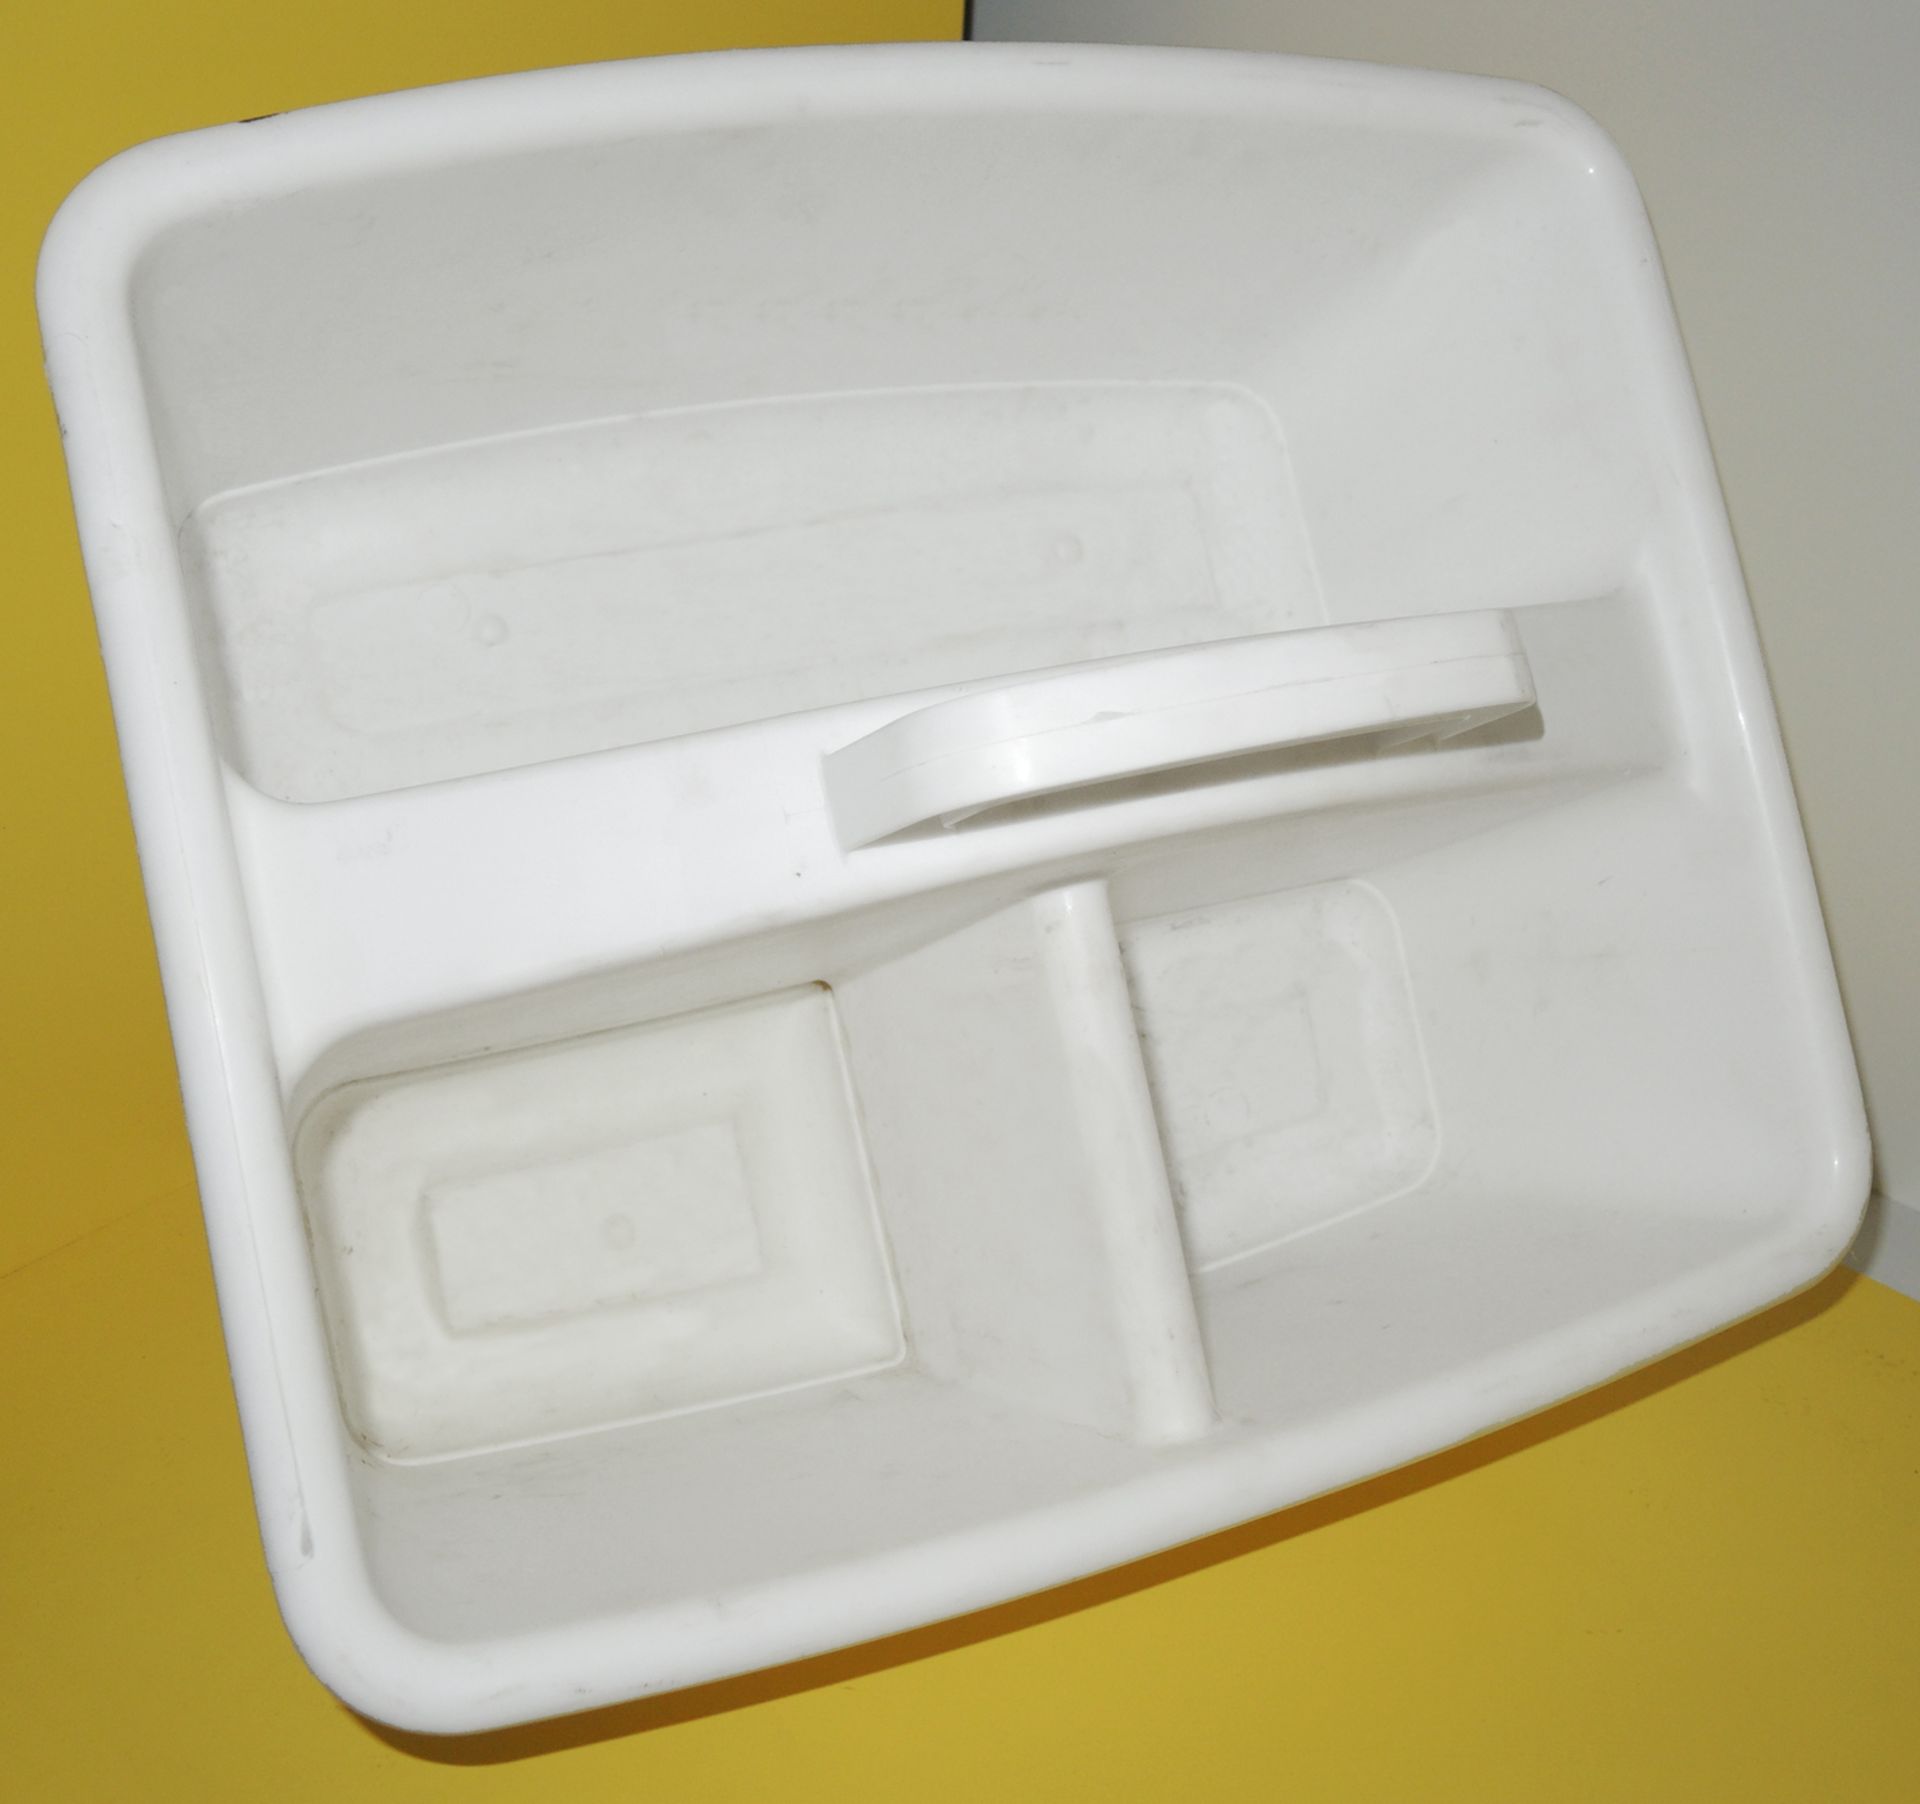 Large Handy Caddy Mold - Image 9 of 13